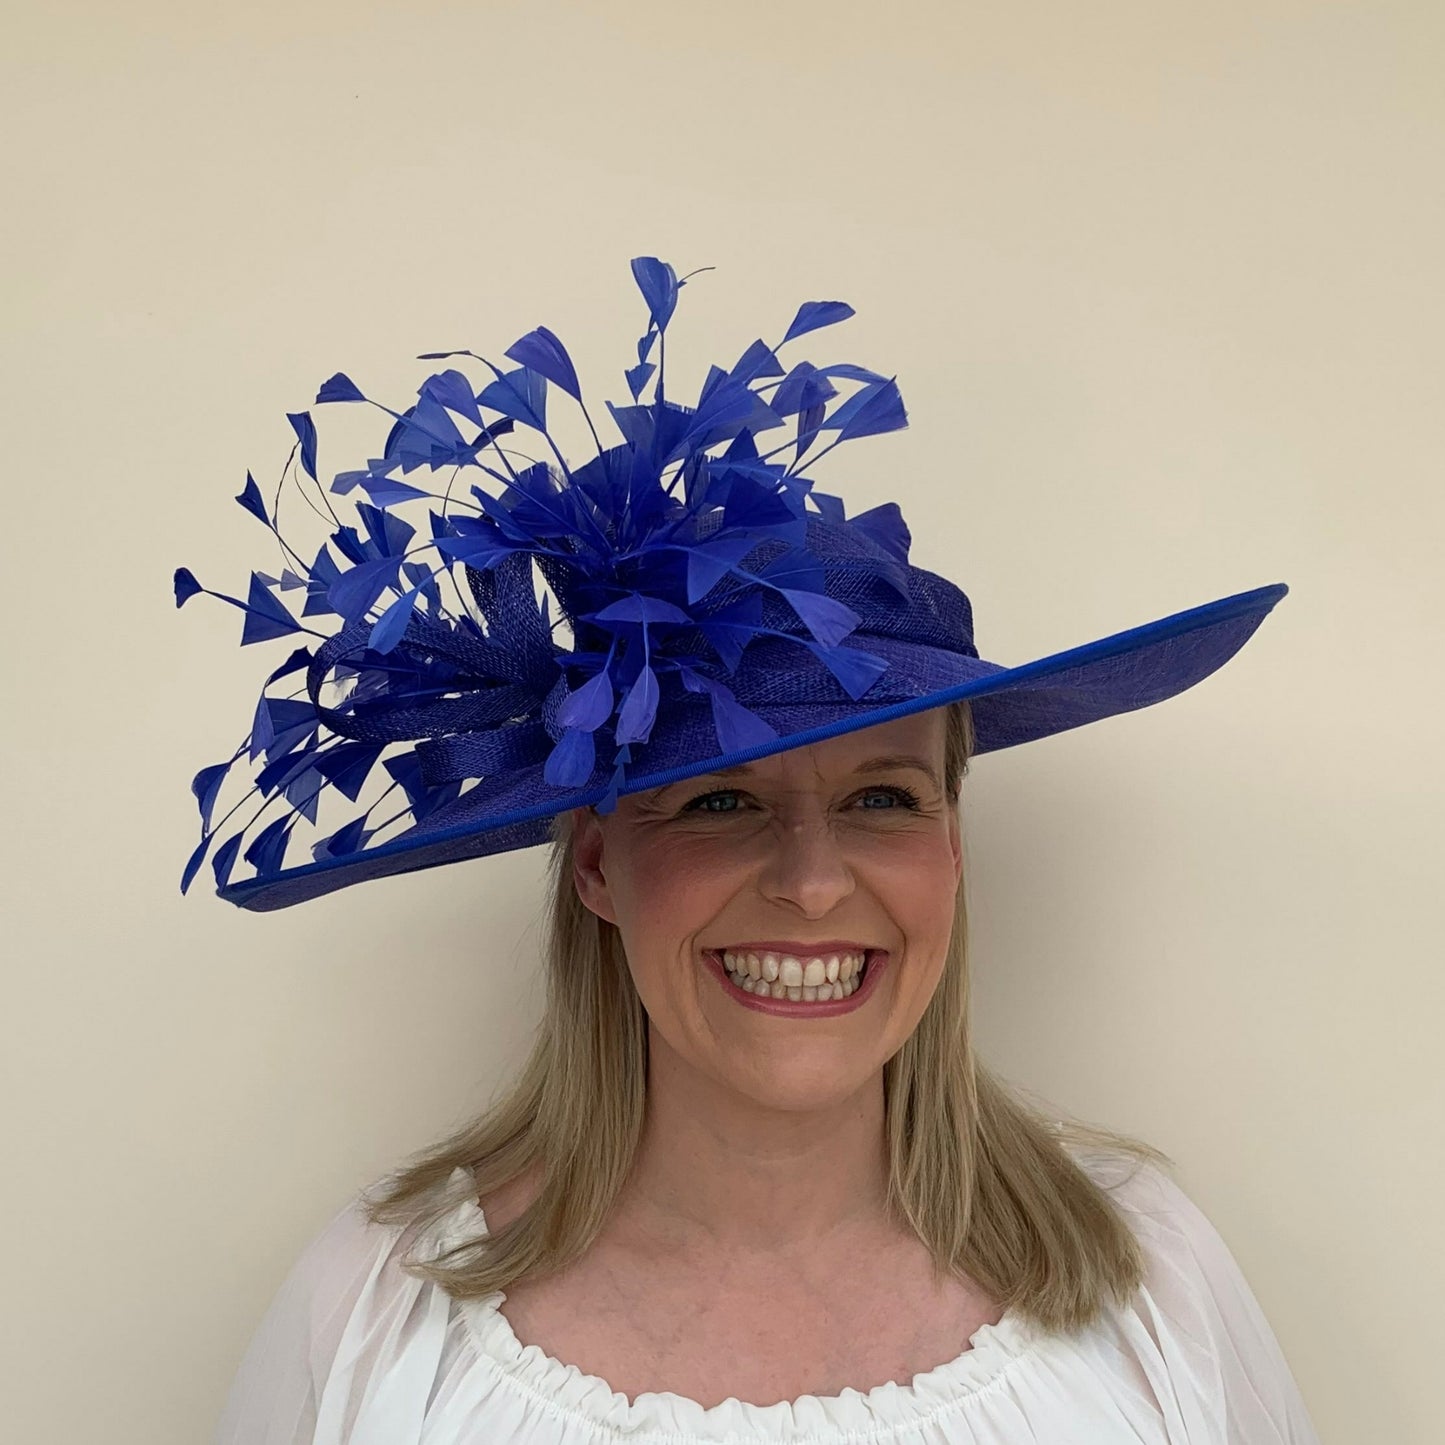 J Bees JB23/284 Large Hatinator with Feathers in Blues